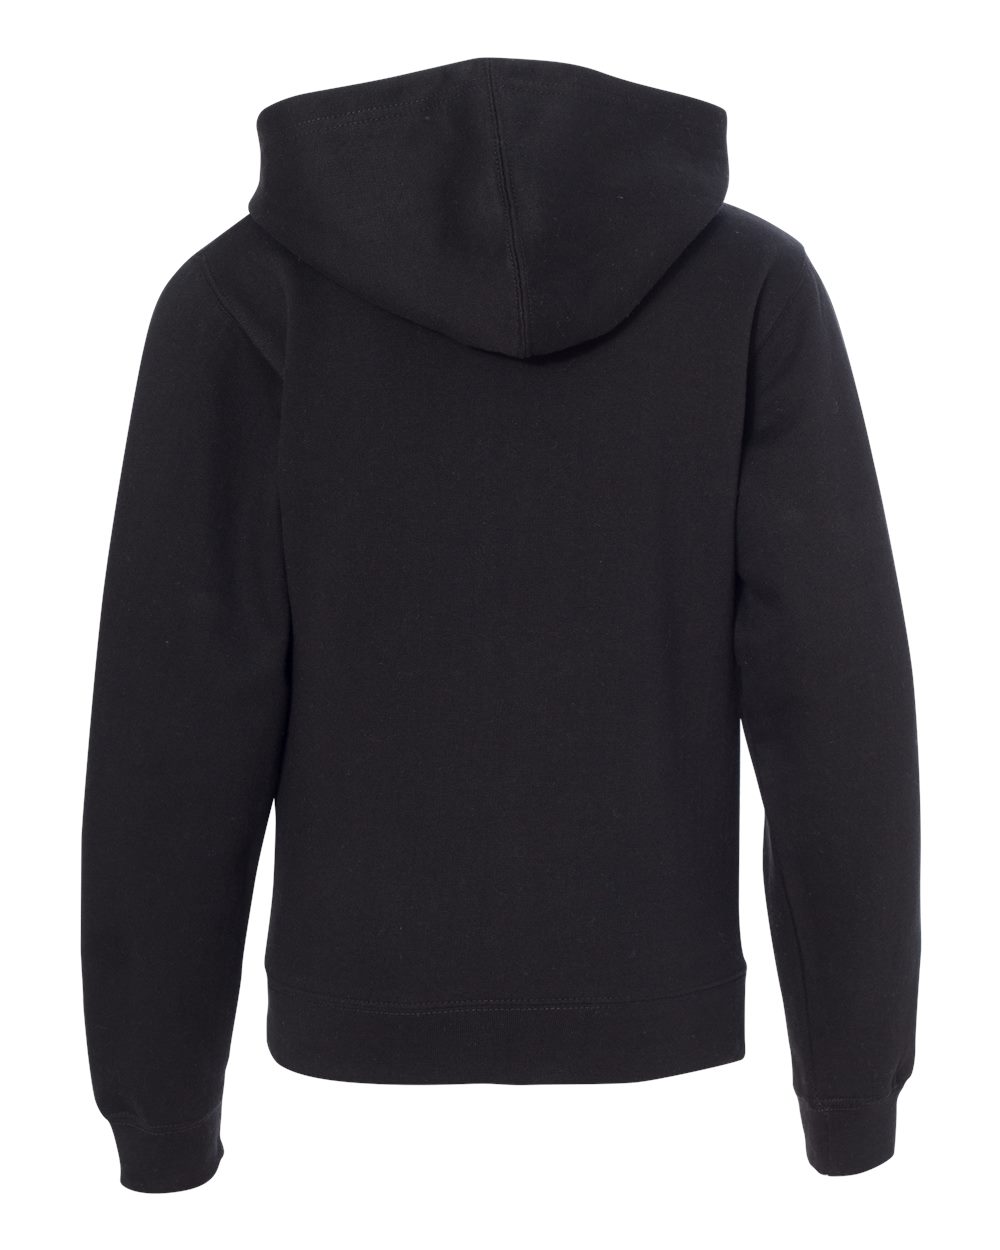 Independent Trading Co. SS4001YZ | Youth Midweight Full-Zip Hooded ...